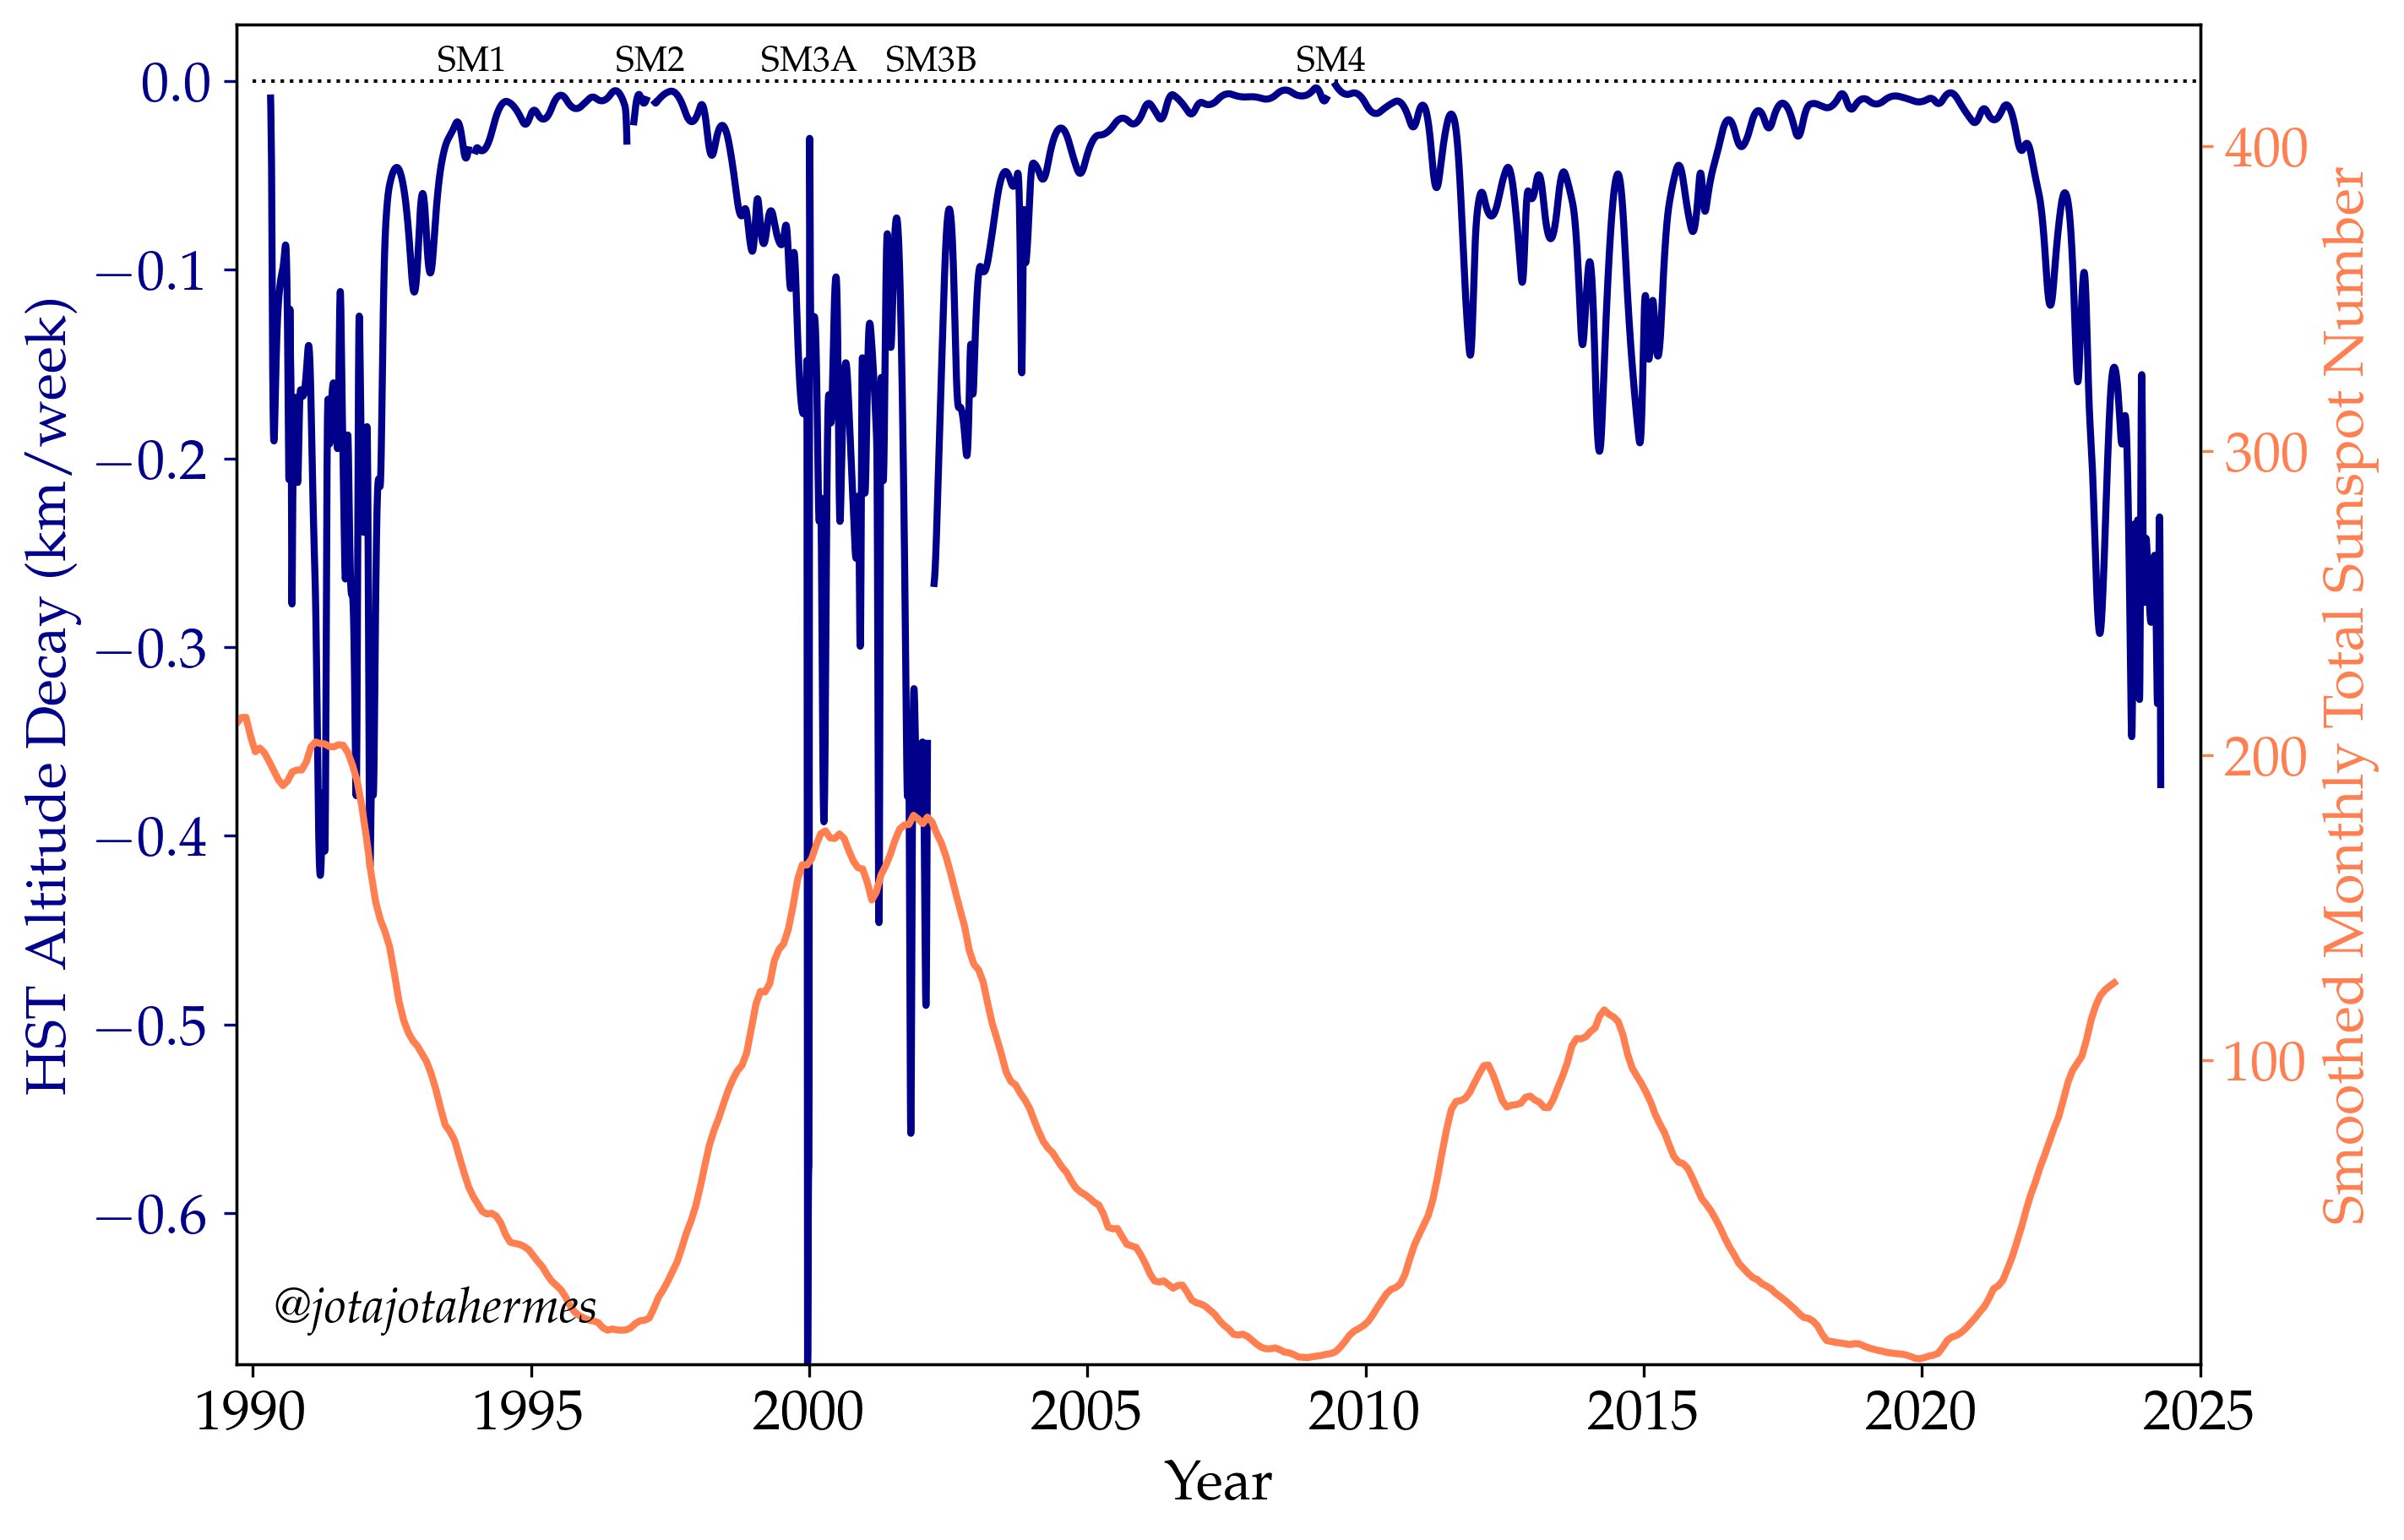 Line graph showing Hubble Orbit Decay (blue) and Smoothed Monthly Sunspot Numbers (orange) from 1990 to 2025, with notable service missions marked.